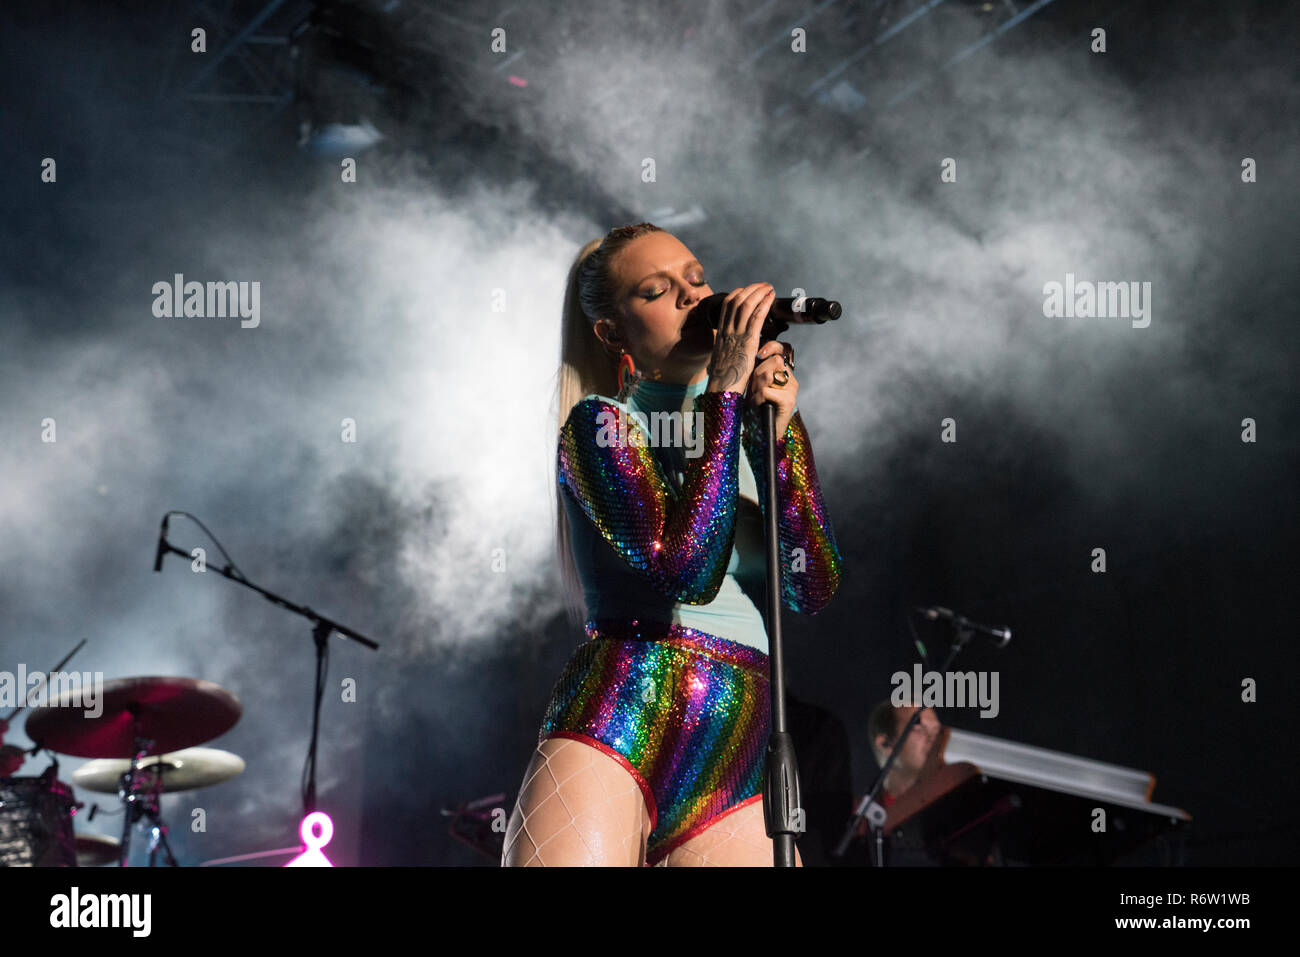 The Swedish pop singer/songwriter Tove Lo headlined the entertainment on Pride Island, Pier 97, in midtown Manhattan on June 23, 2018. Stock Photo